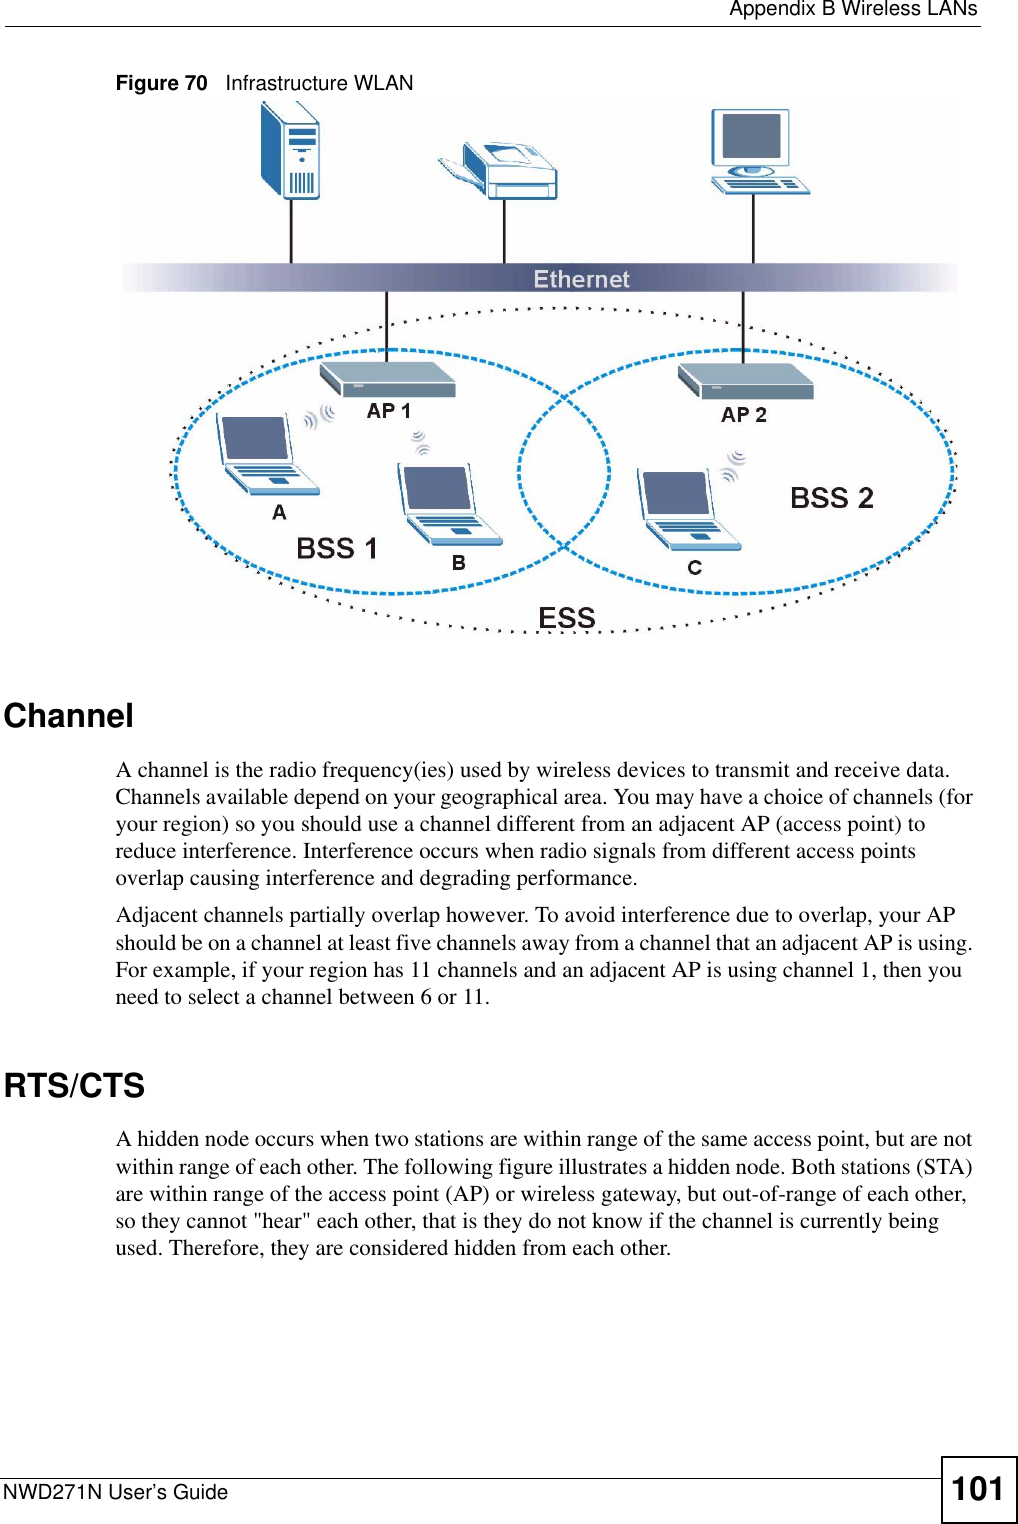  Appendix B Wireless LANsNWD271N User’s Guide 101Figure 70   Infrastructure WLANChannelA channel is the radio frequency(ies) used by wireless devices to transmit and receive data. Channels available depend on your geographical area. You may have a choice of channels (for your region) so you should use a channel different from an adjacent AP (access point) to reduce interference. Interference occurs when radio signals from different access points overlap causing interference and degrading performance.Adjacent channels partially overlap however. To avoid interference due to overlap, your AP should be on a channel at least five channels away from a channel that an adjacent AP is using. For example, if your region has 11 channels and an adjacent AP is using channel 1, then you need to select a channel between 6 or 11.RTS/CTSA hidden node occurs when two stations are within range of the same access point, but are not within range of each other. The following figure illustrates a hidden node. Both stations (STA) are within range of the access point (AP) or wireless gateway, but out-of-range of each other, so they cannot &quot;hear&quot; each other, that is they do not know if the channel is currently being used. Therefore, they are considered hidden from each other. 